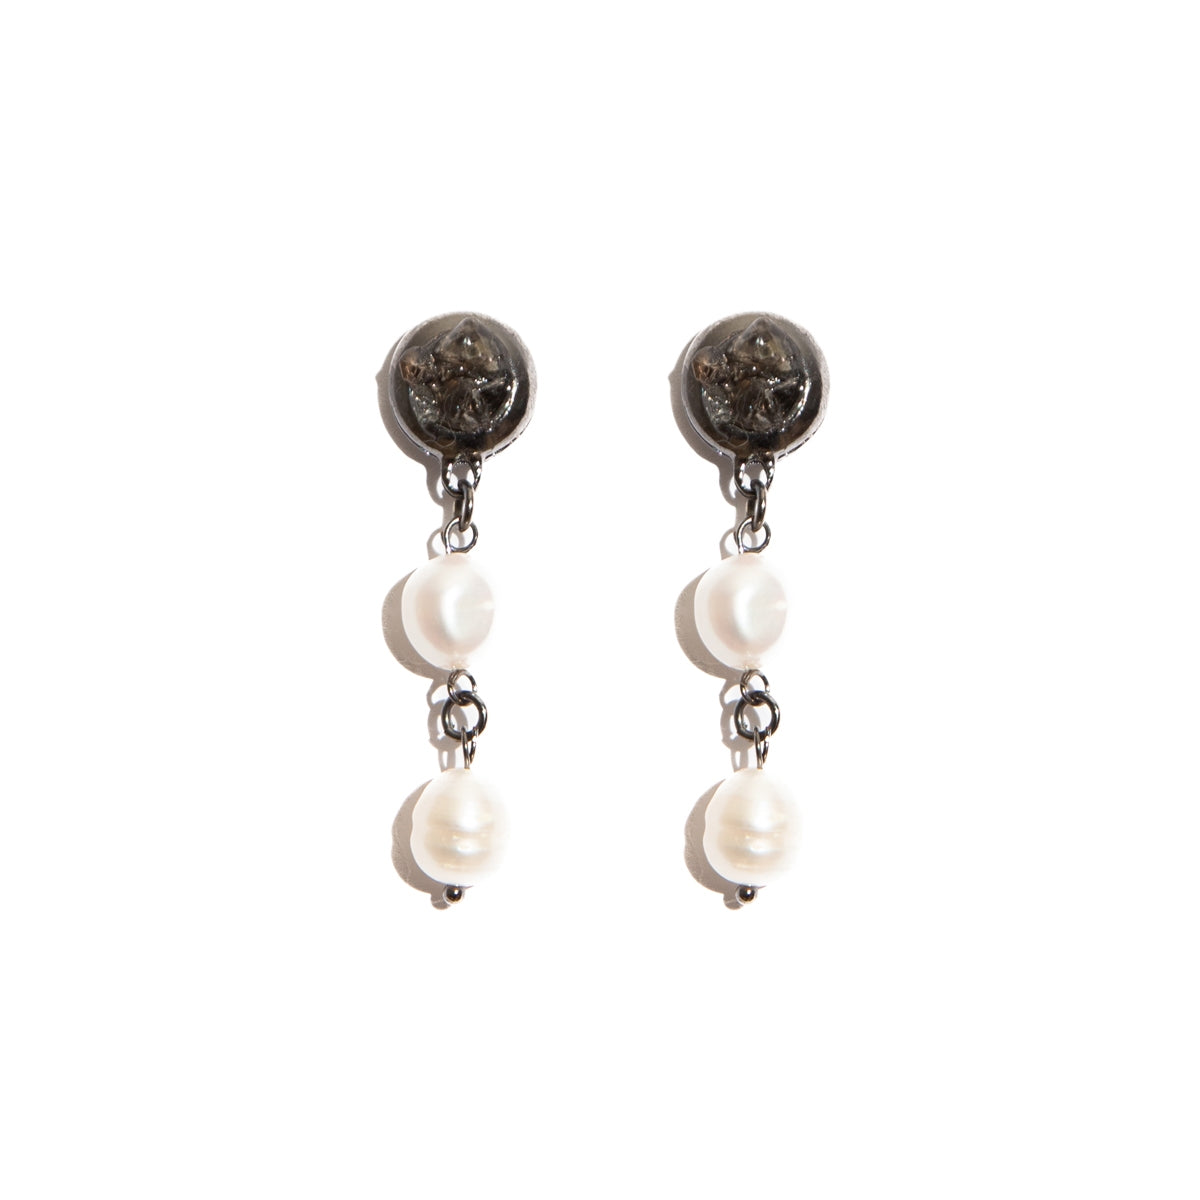 Earring Lucia with pearls and smoky quartz gravel plated in graphite